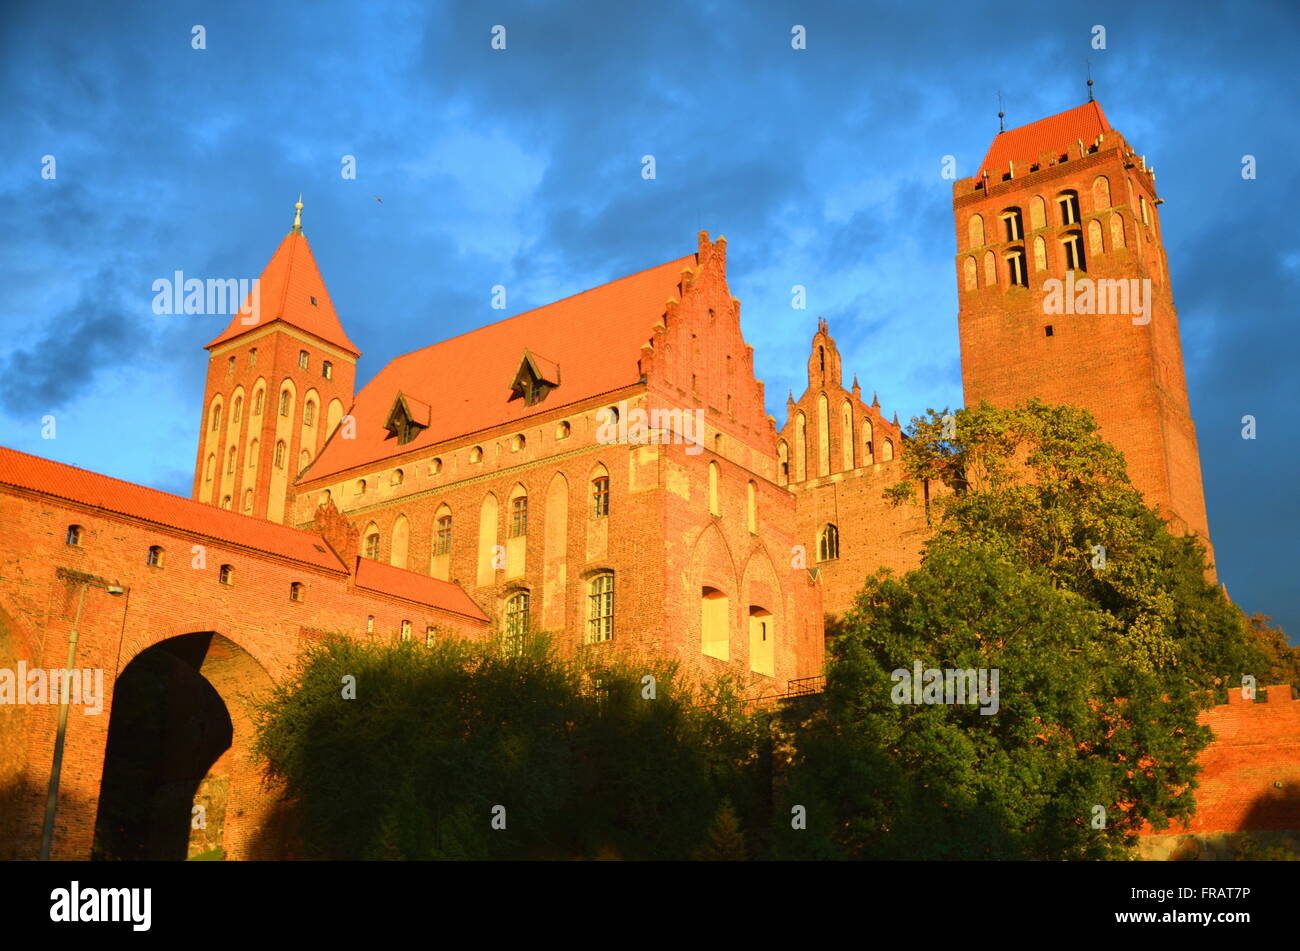 Picturesque view of Kwidzyn cathedral in Pomerania region, Poland Stock Photo